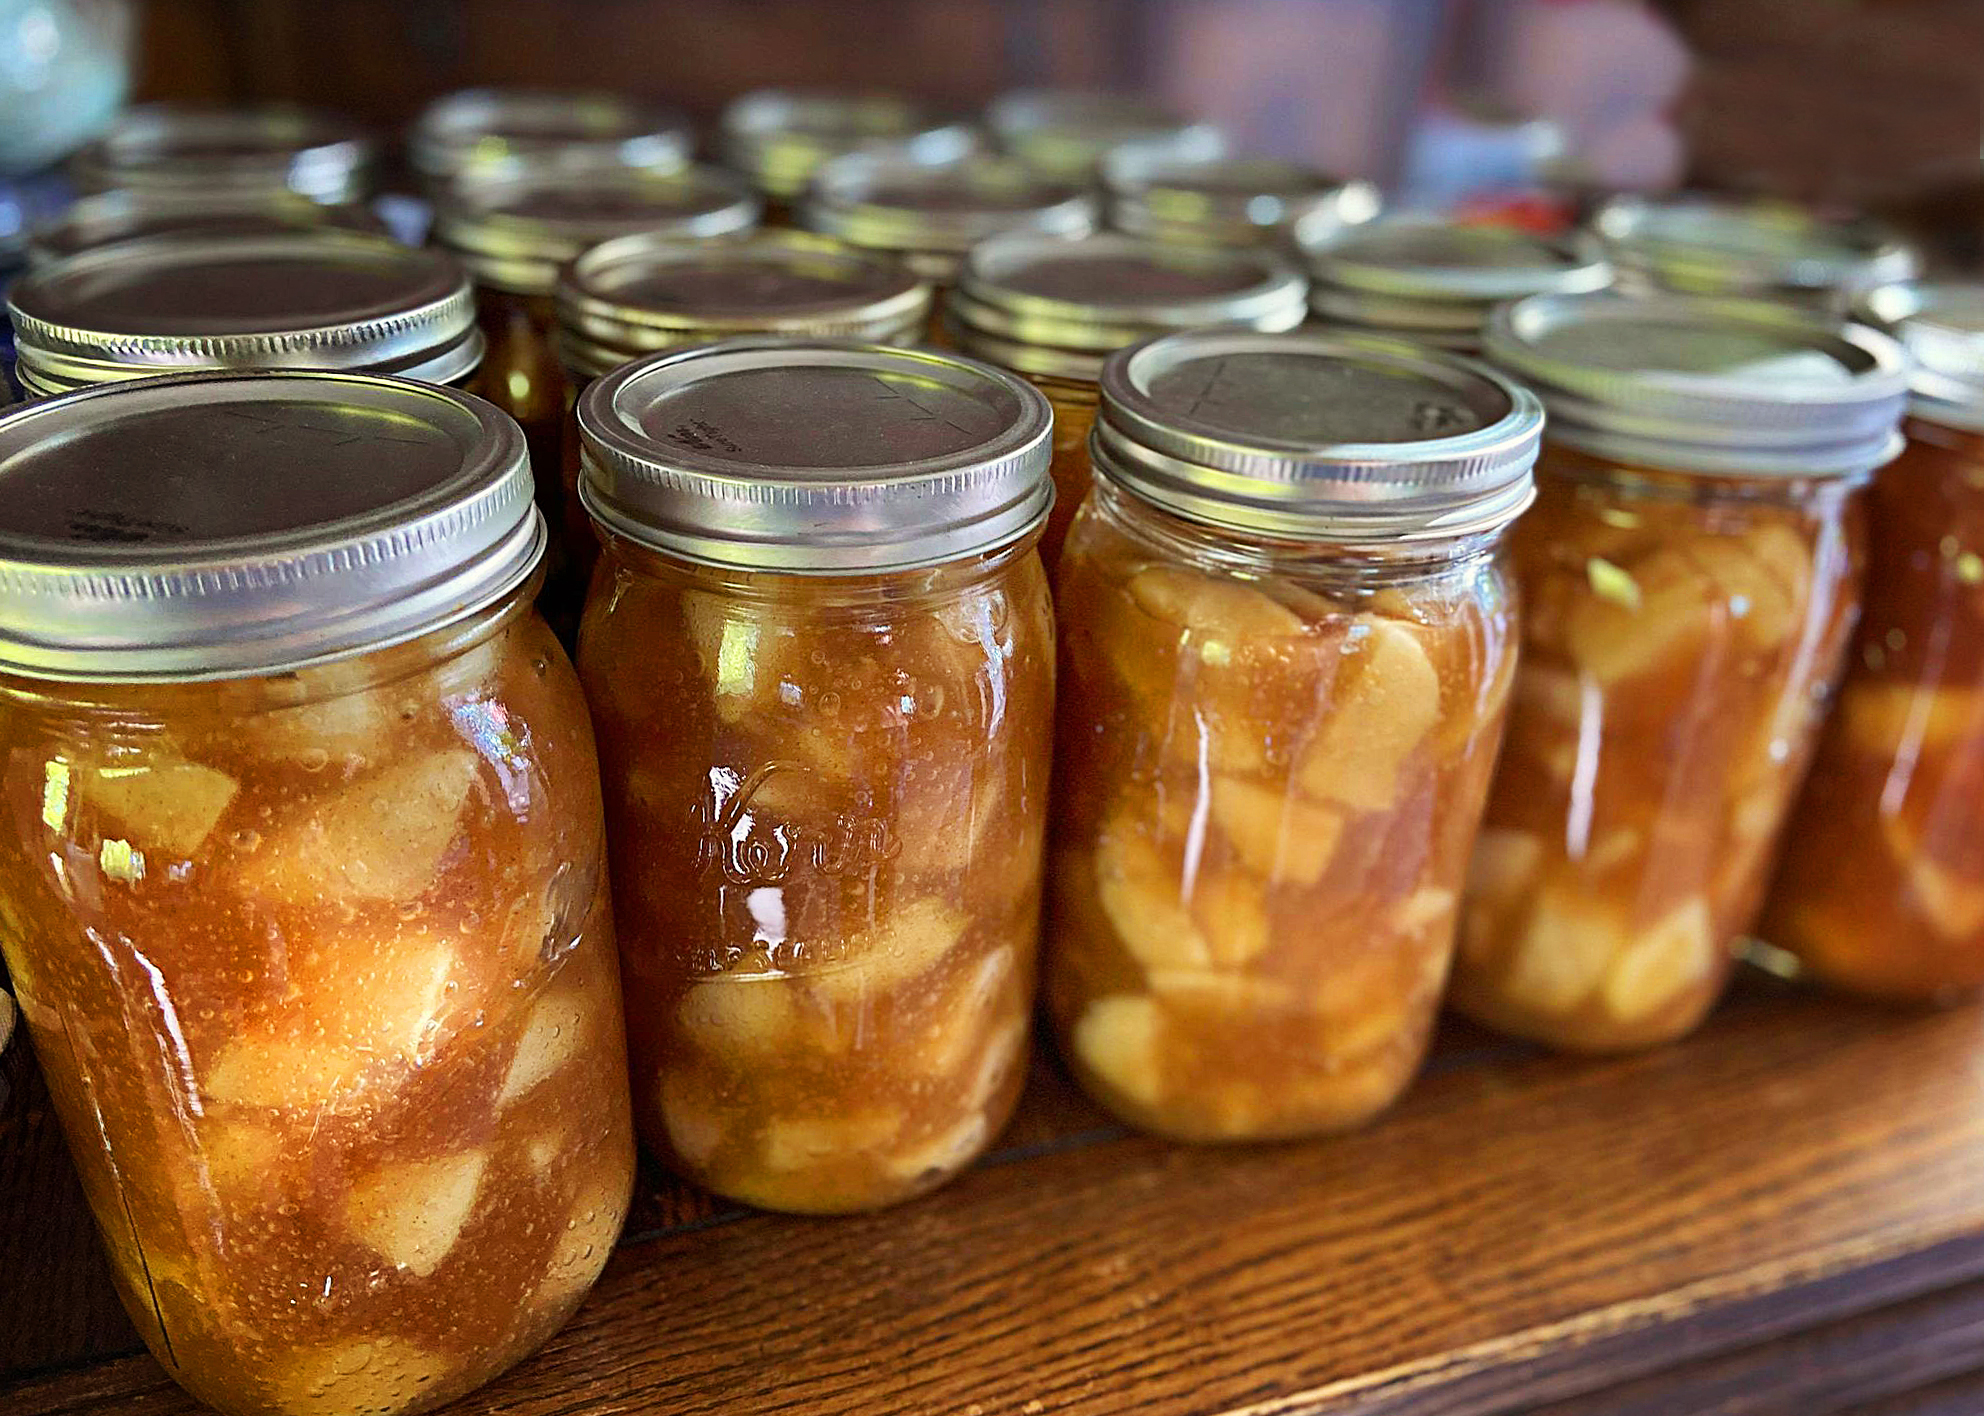 Try my recipe for homemade apple pie filling